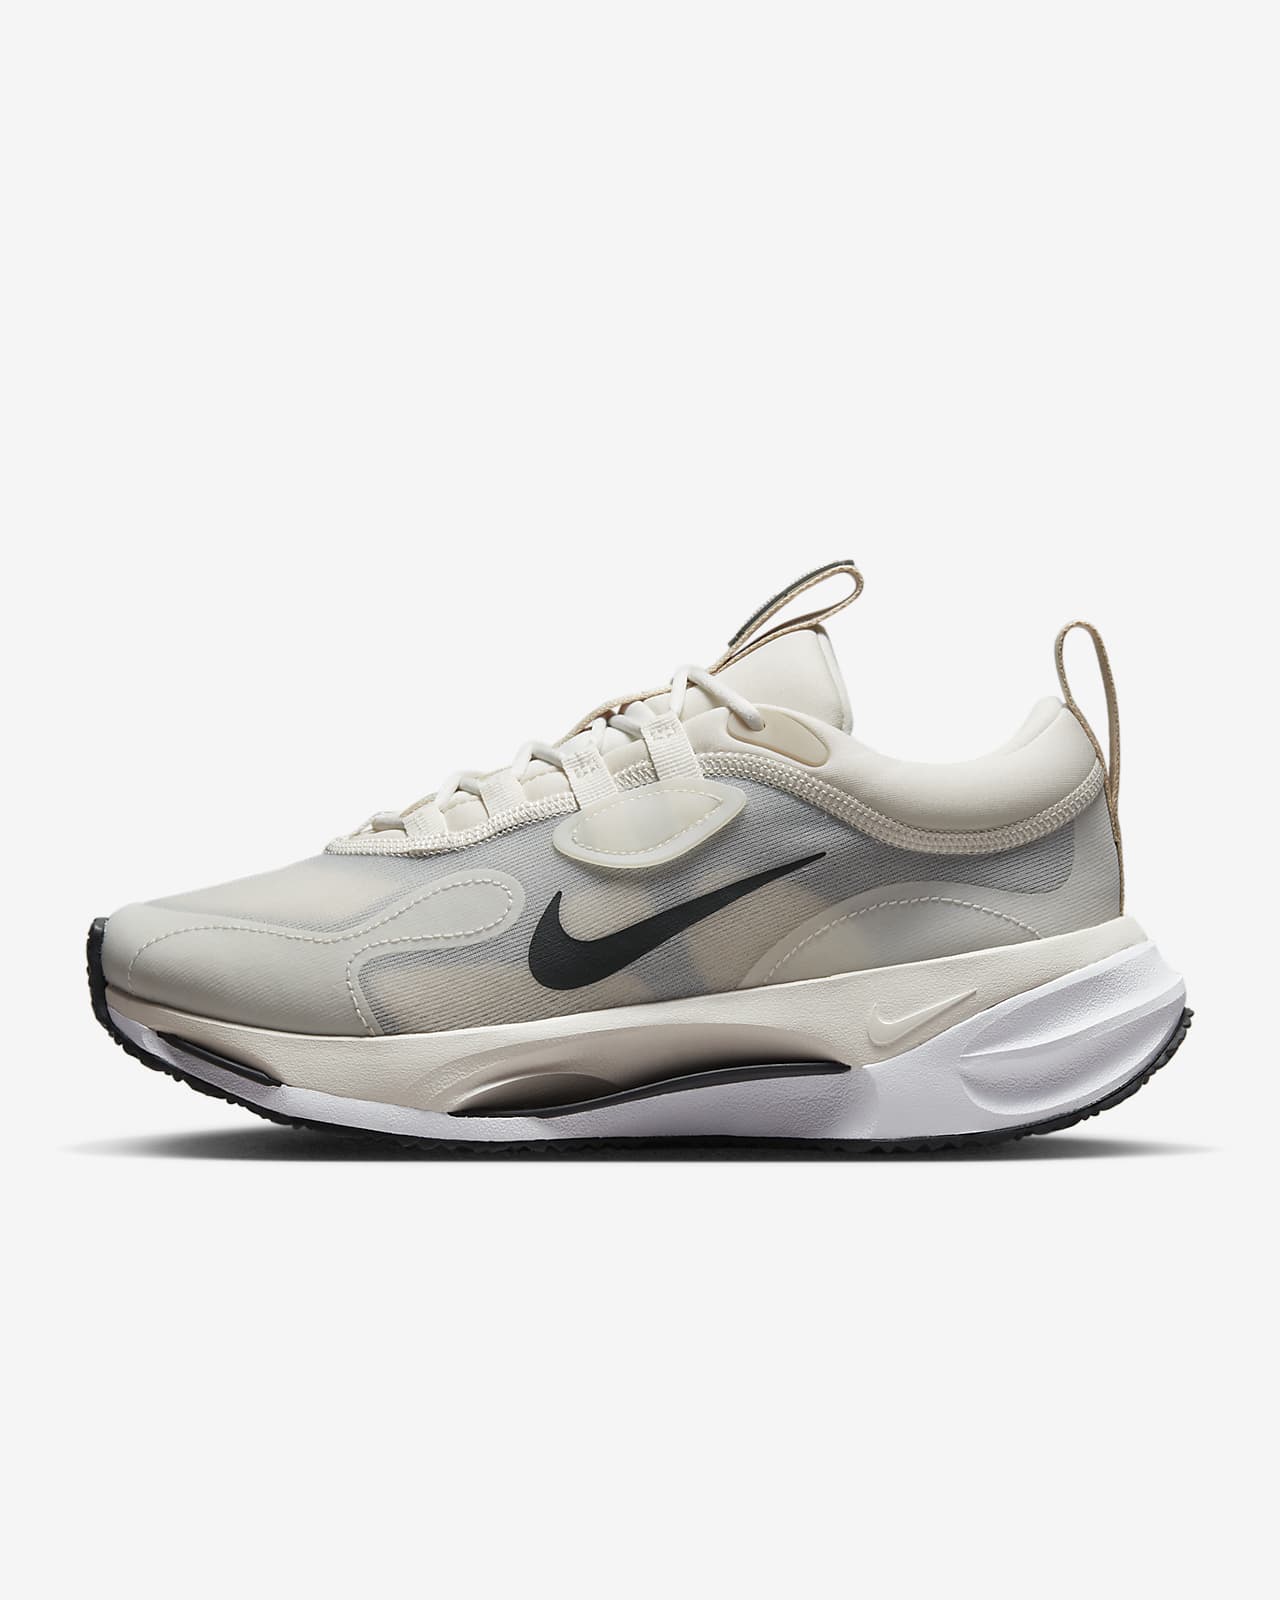 Nike Spark Women's Shoes.